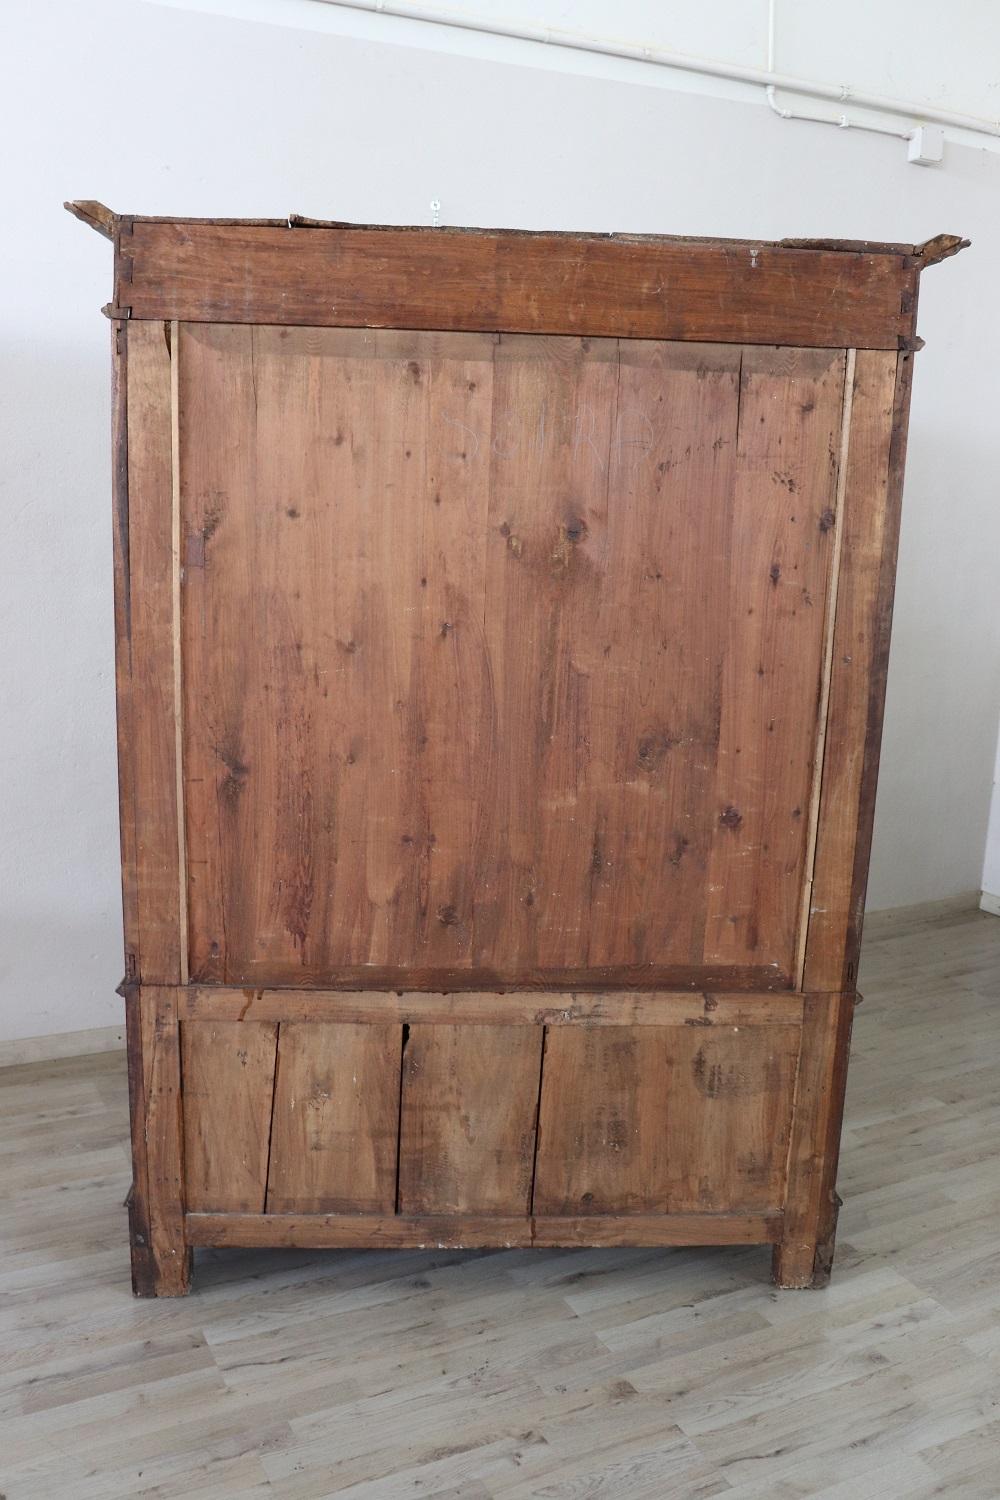 19th Century Italian Solid Walnut Wood Antique Wardrobe or Armoire For Sale 3